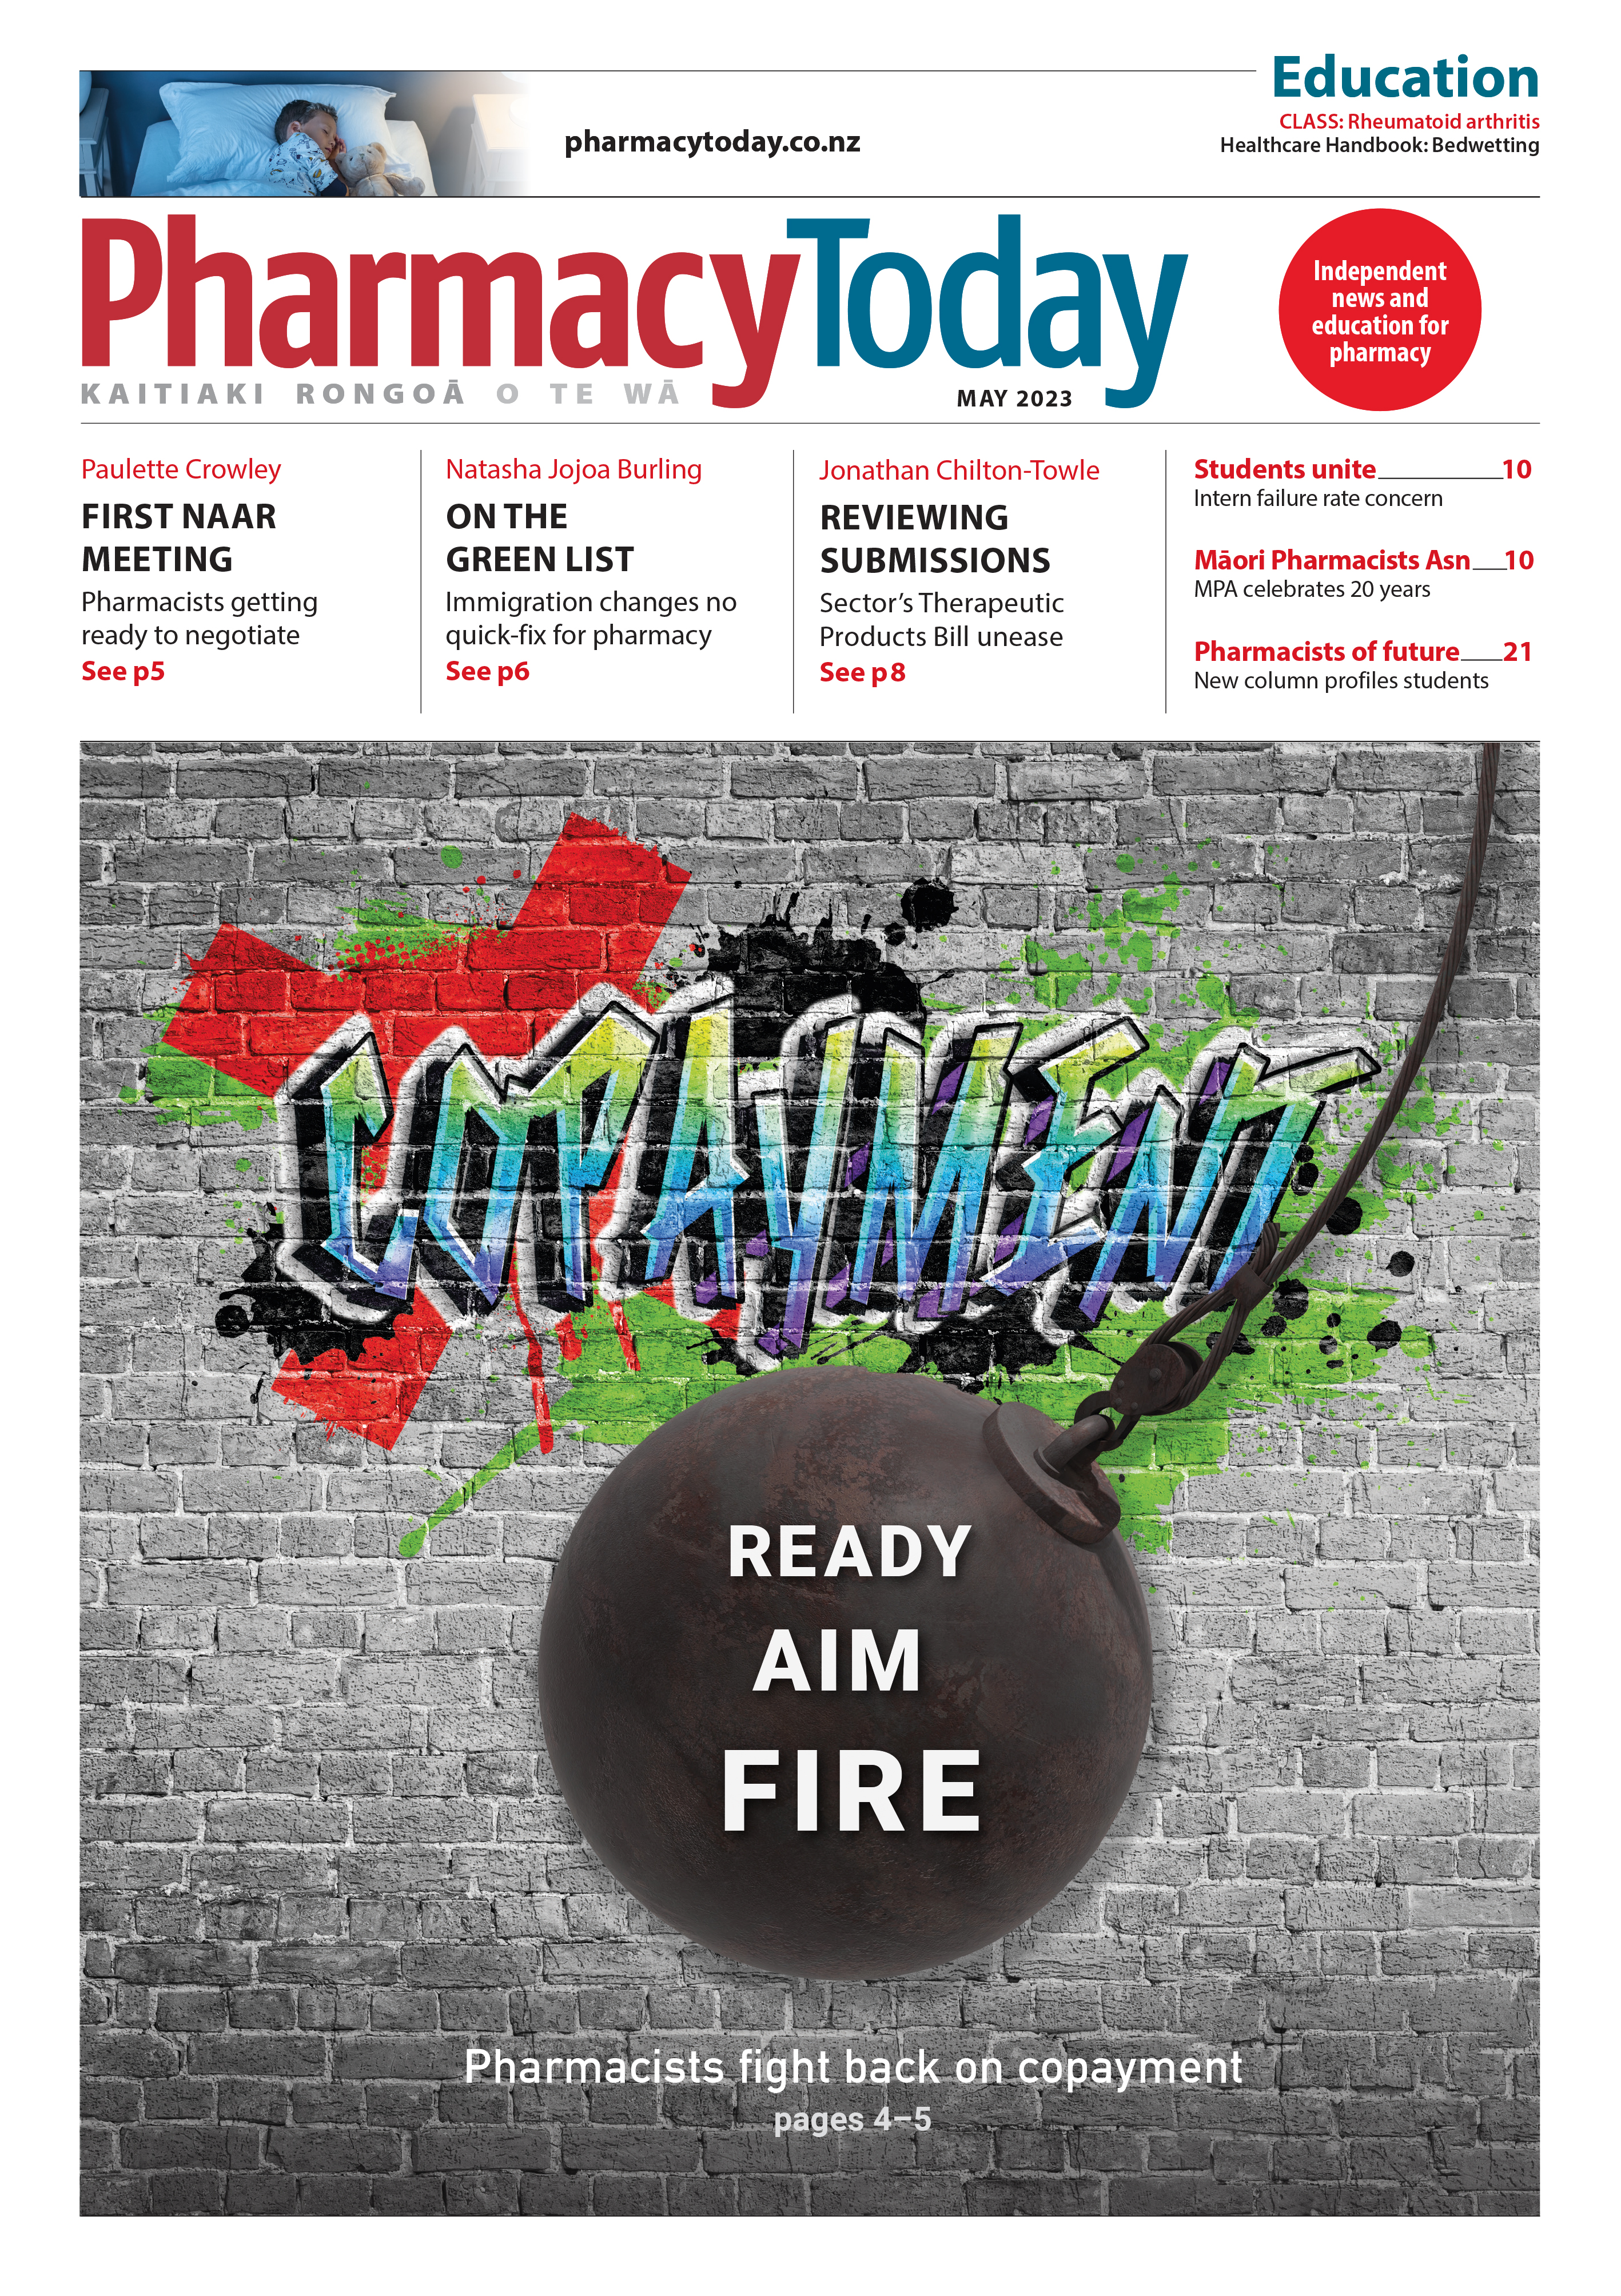 Pharmacy Today MAY 2023 cover